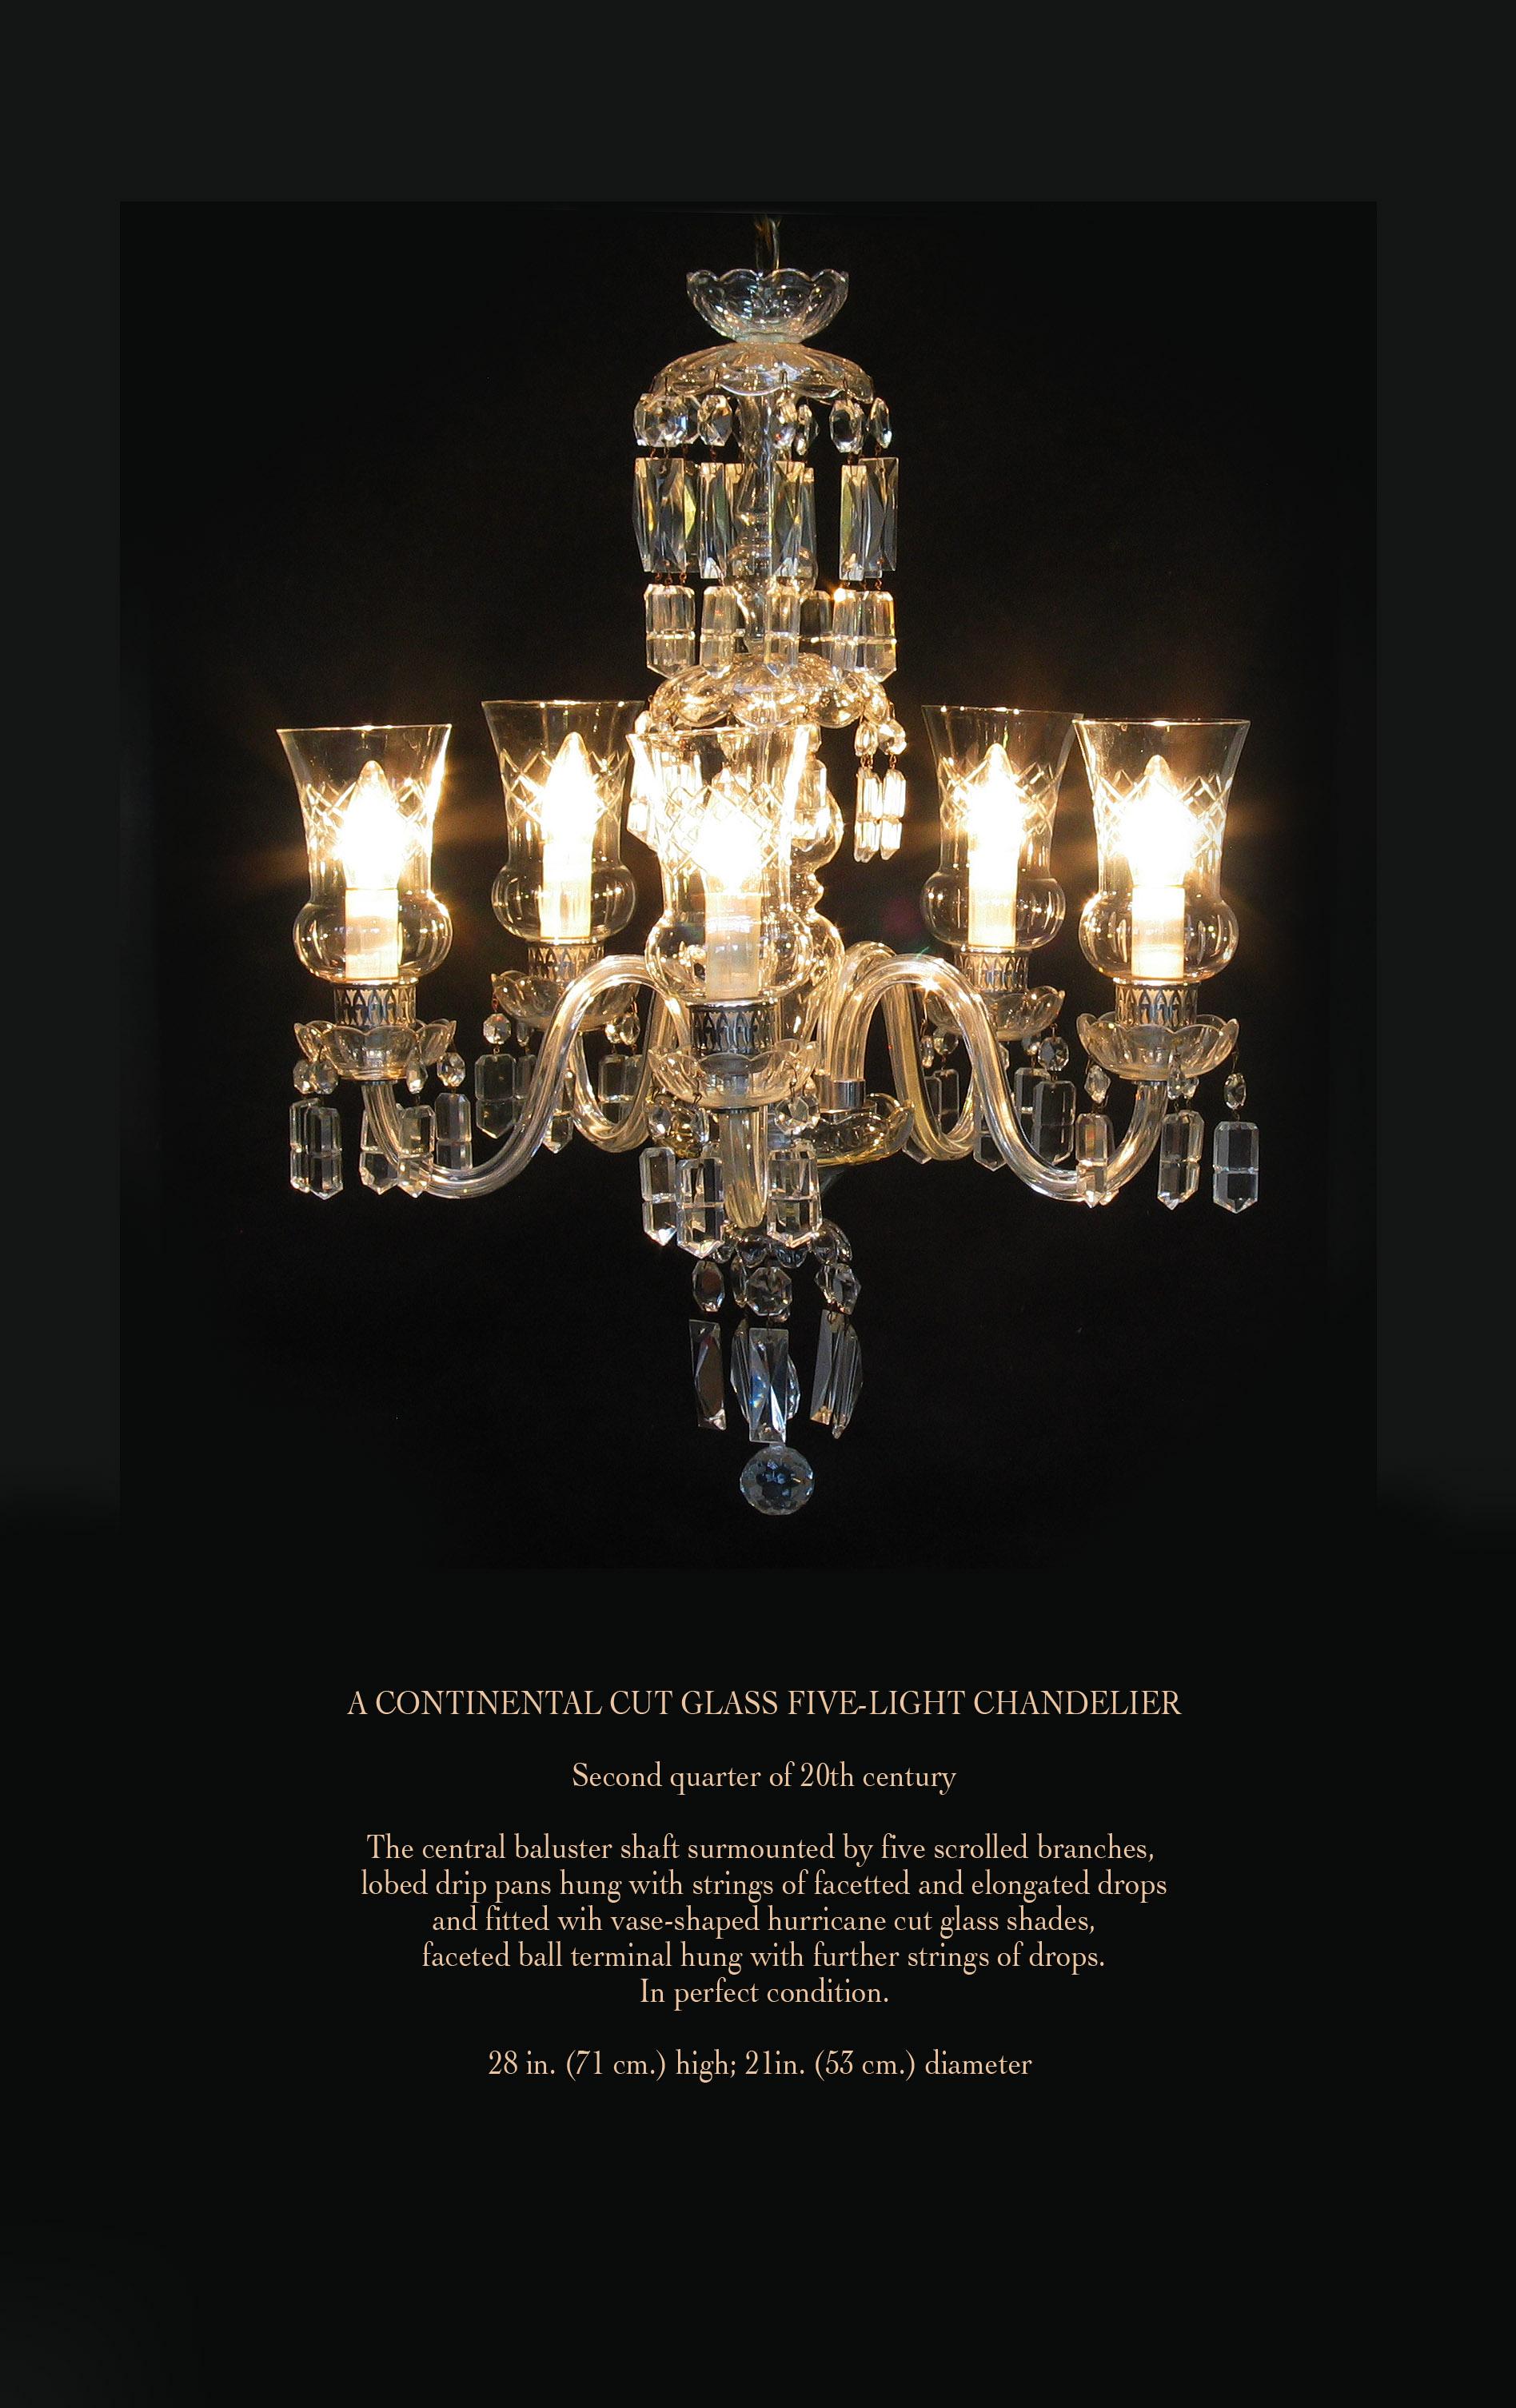 A continental cut glass five-light chandelier,

Second quarter of 20th century.

The central baluster shaft surmounted by five scrolled branches, 
lobed drip pans hung with strings of facetted and elongated drops
and fitted wih vase-shaped